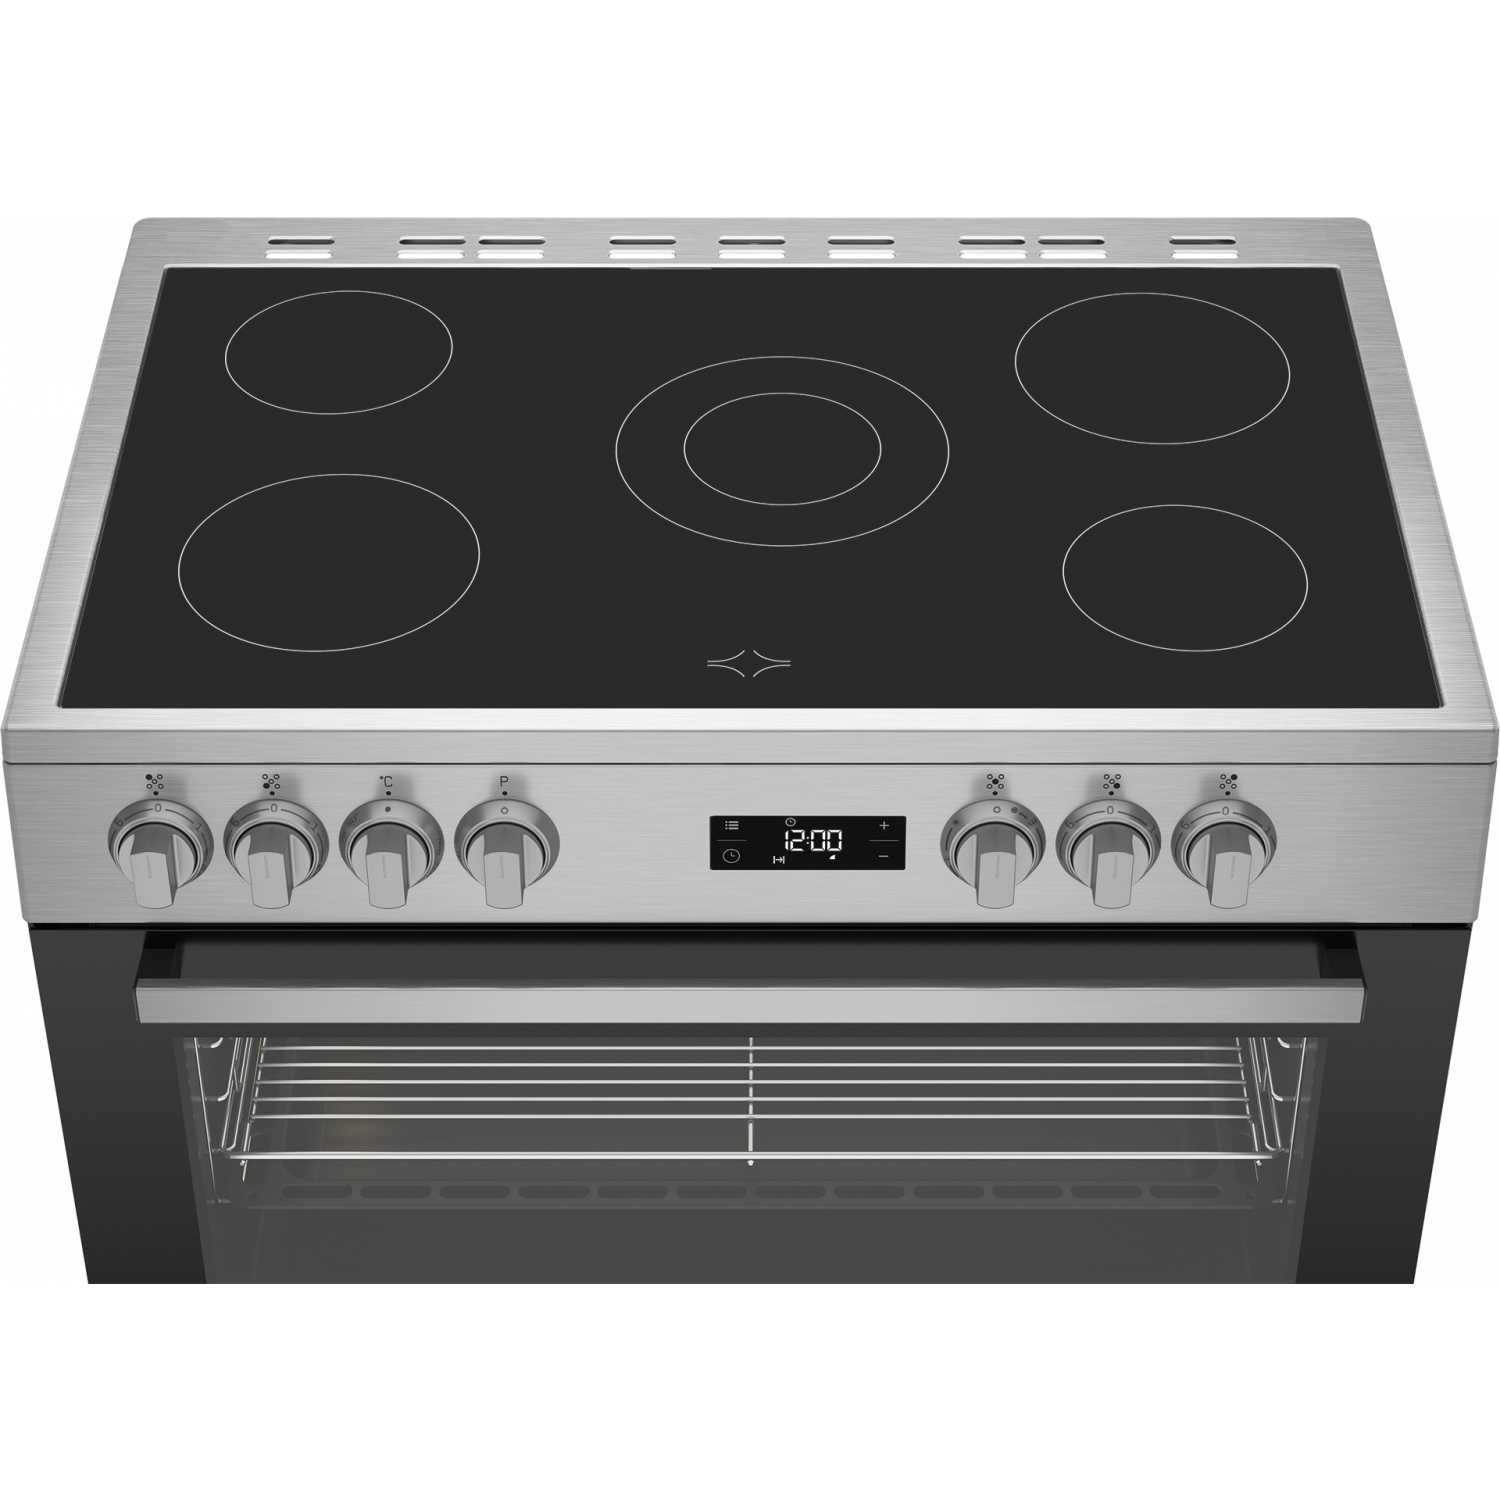 Beko GF17300GXNS 90cm Electric Range Cooker with Ceramic Hob - Stainless Steel - A Rated - 1